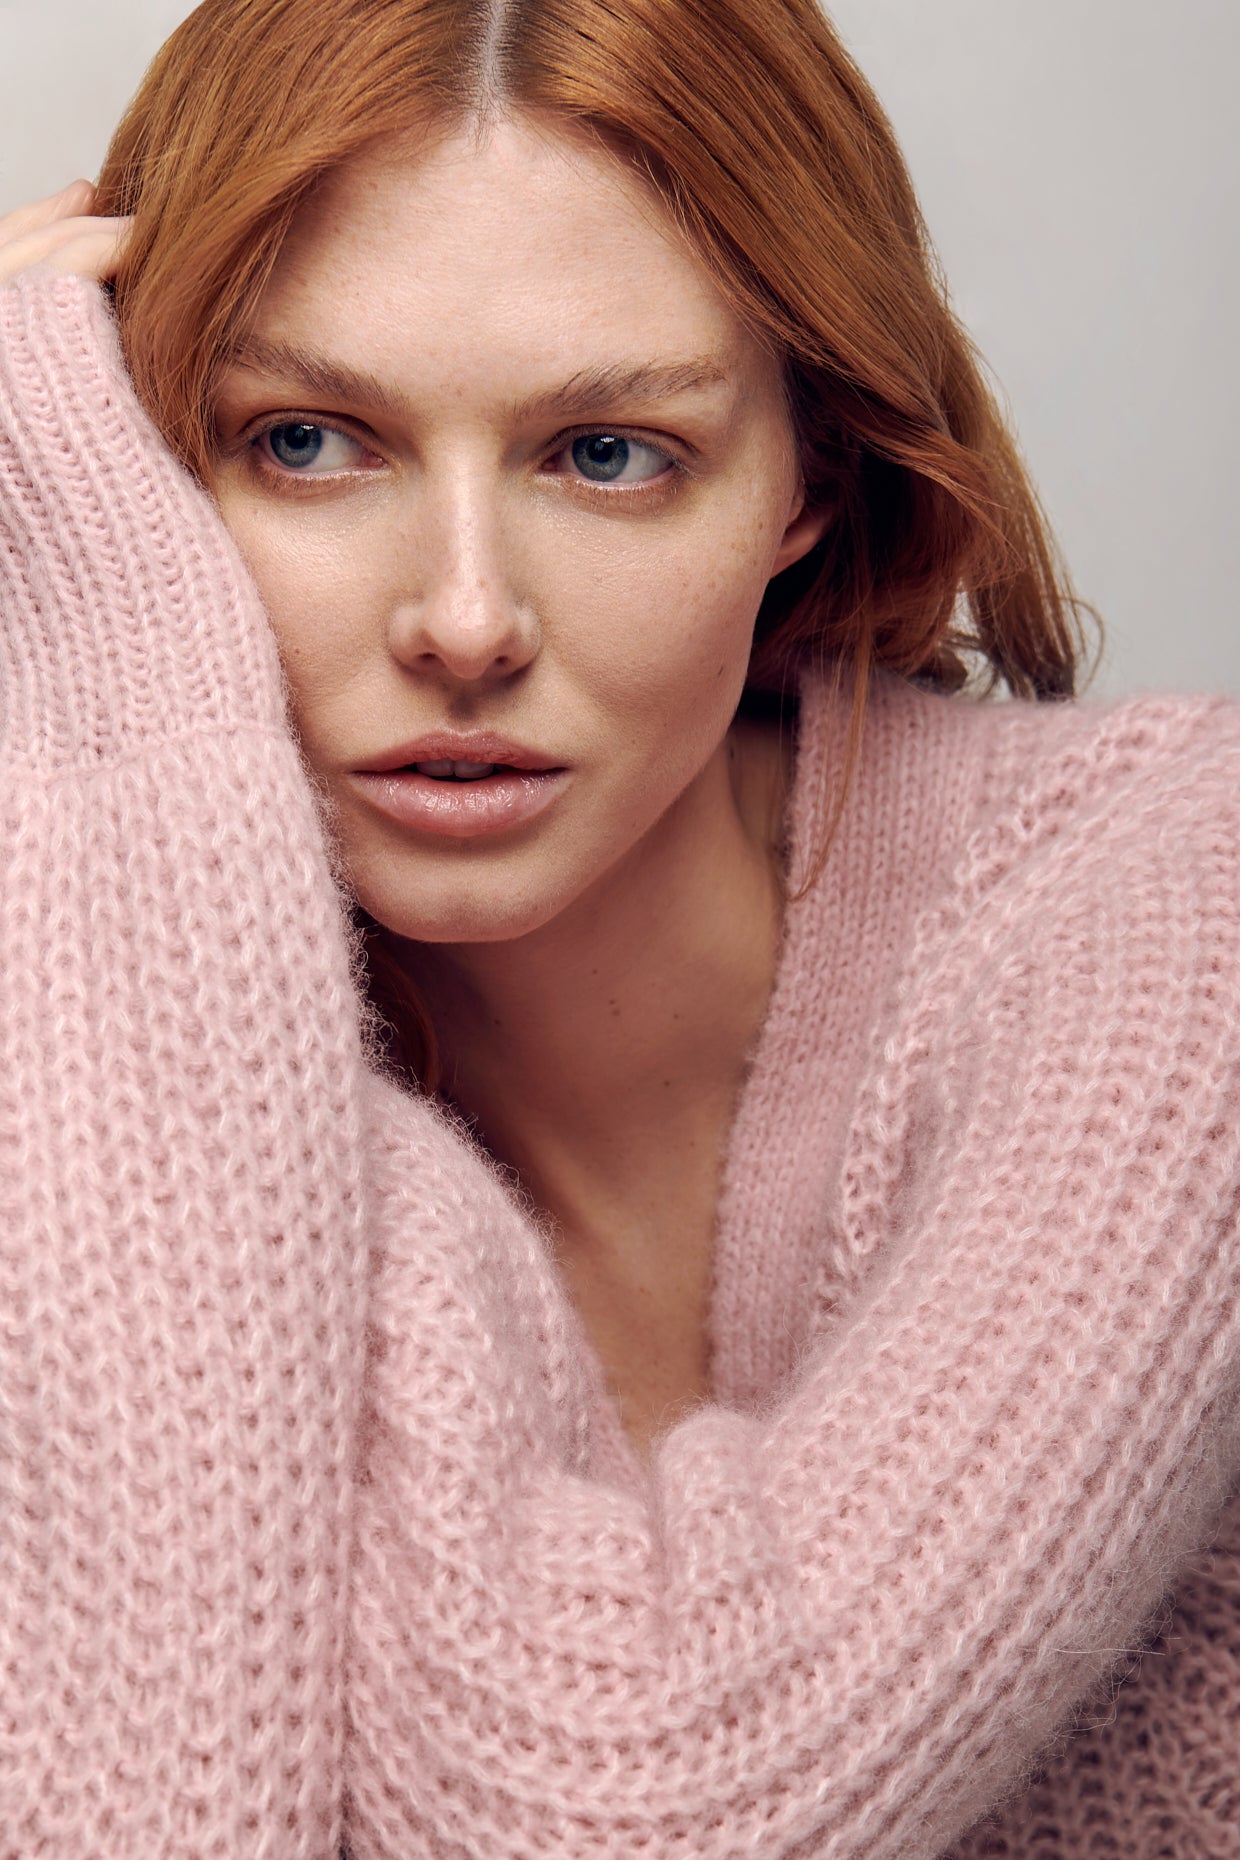 In a close-up picture, a chunky pink V-neck cardigan from Eleven Six takes center stage. The cardigan's plush texture and vibrant pink hue are showcased, adding a cozy yet stylish element to any outfit. The detailed knit pattern adds depth and dimension to the garment, while the V-neckline offers a flattering silhouette. This versatile piece is perfect for layering and adding a pop of color to any ensemble.